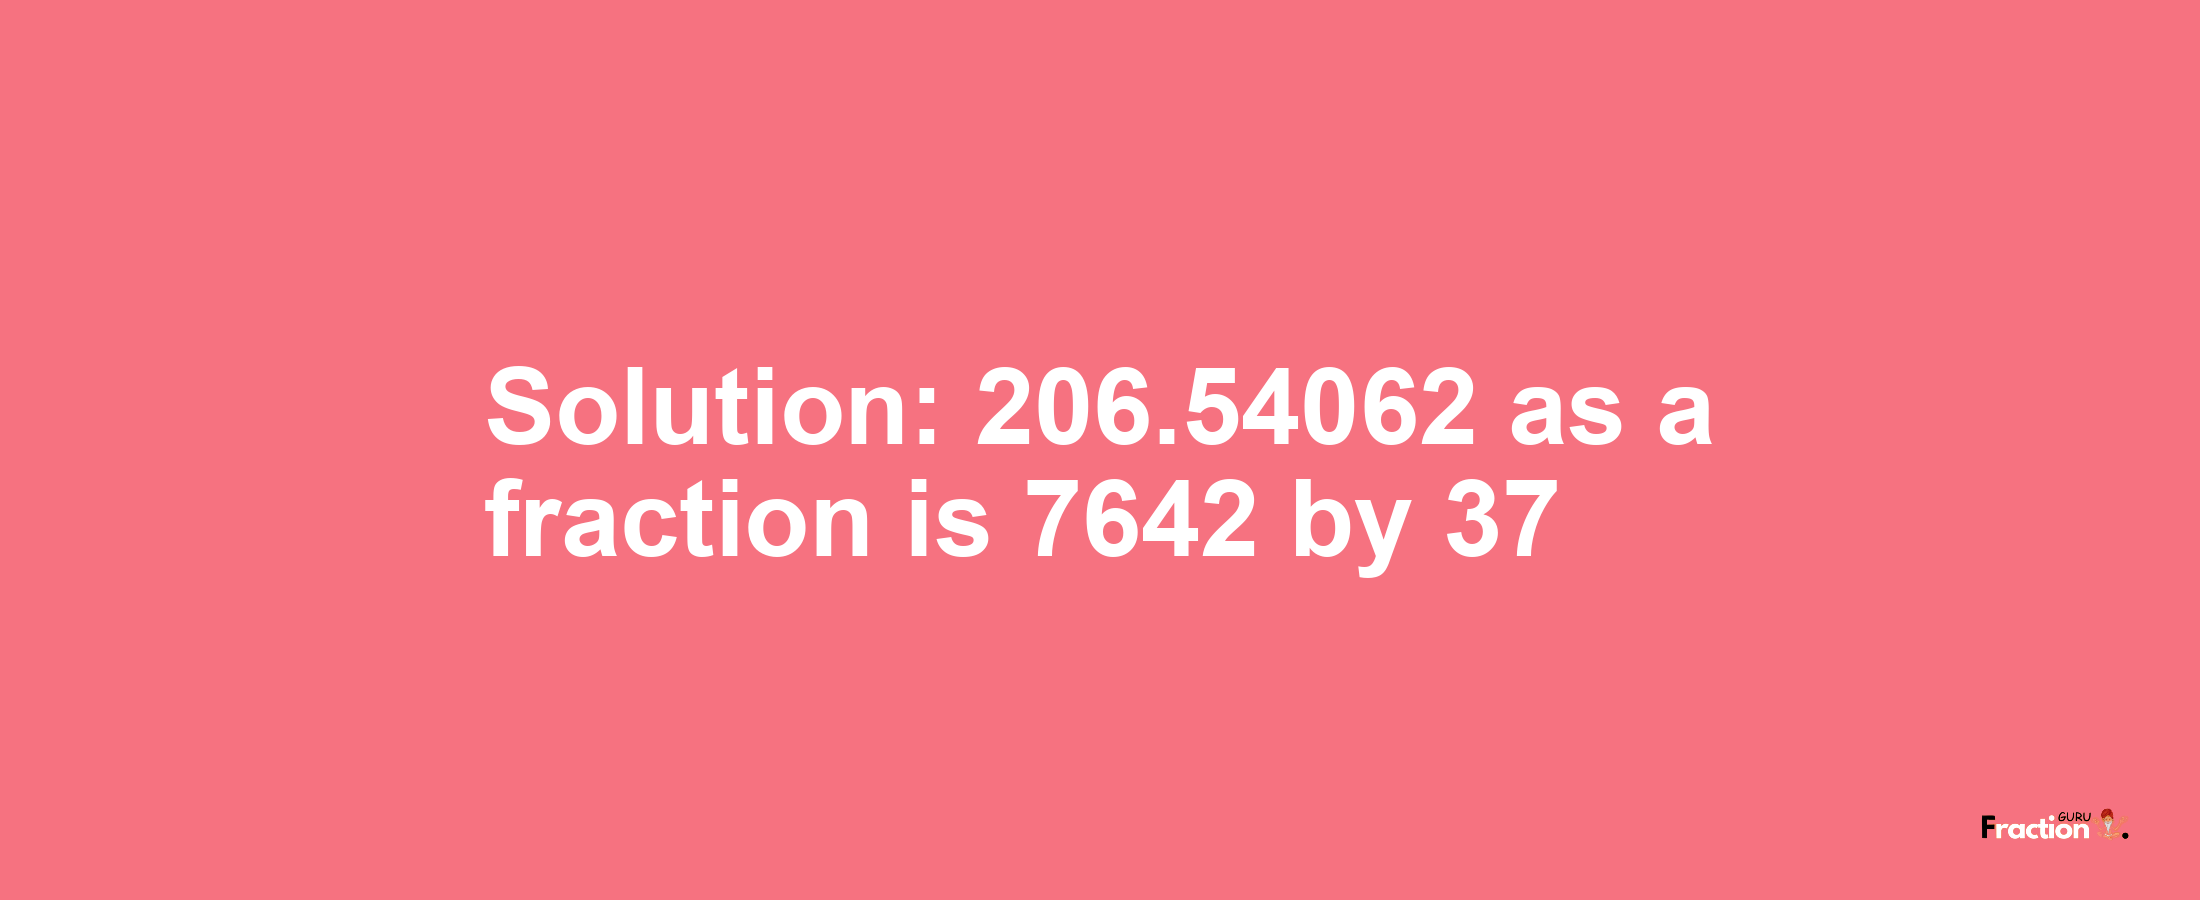 Solution:206.54062 as a fraction is 7642/37